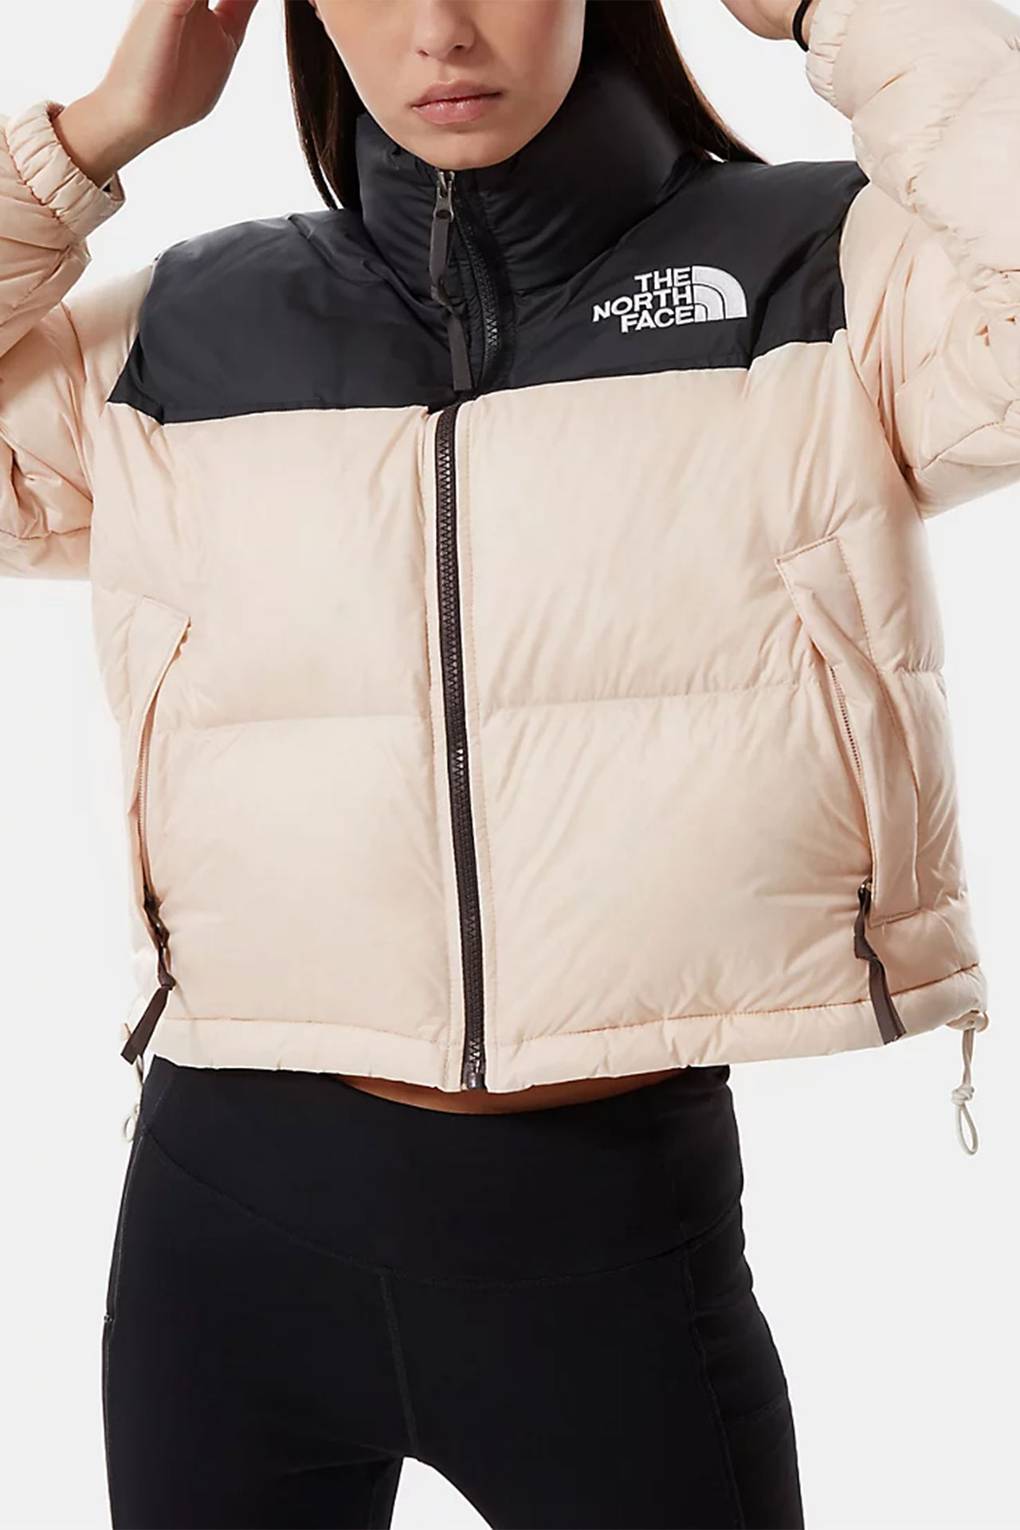 north face pink puffer